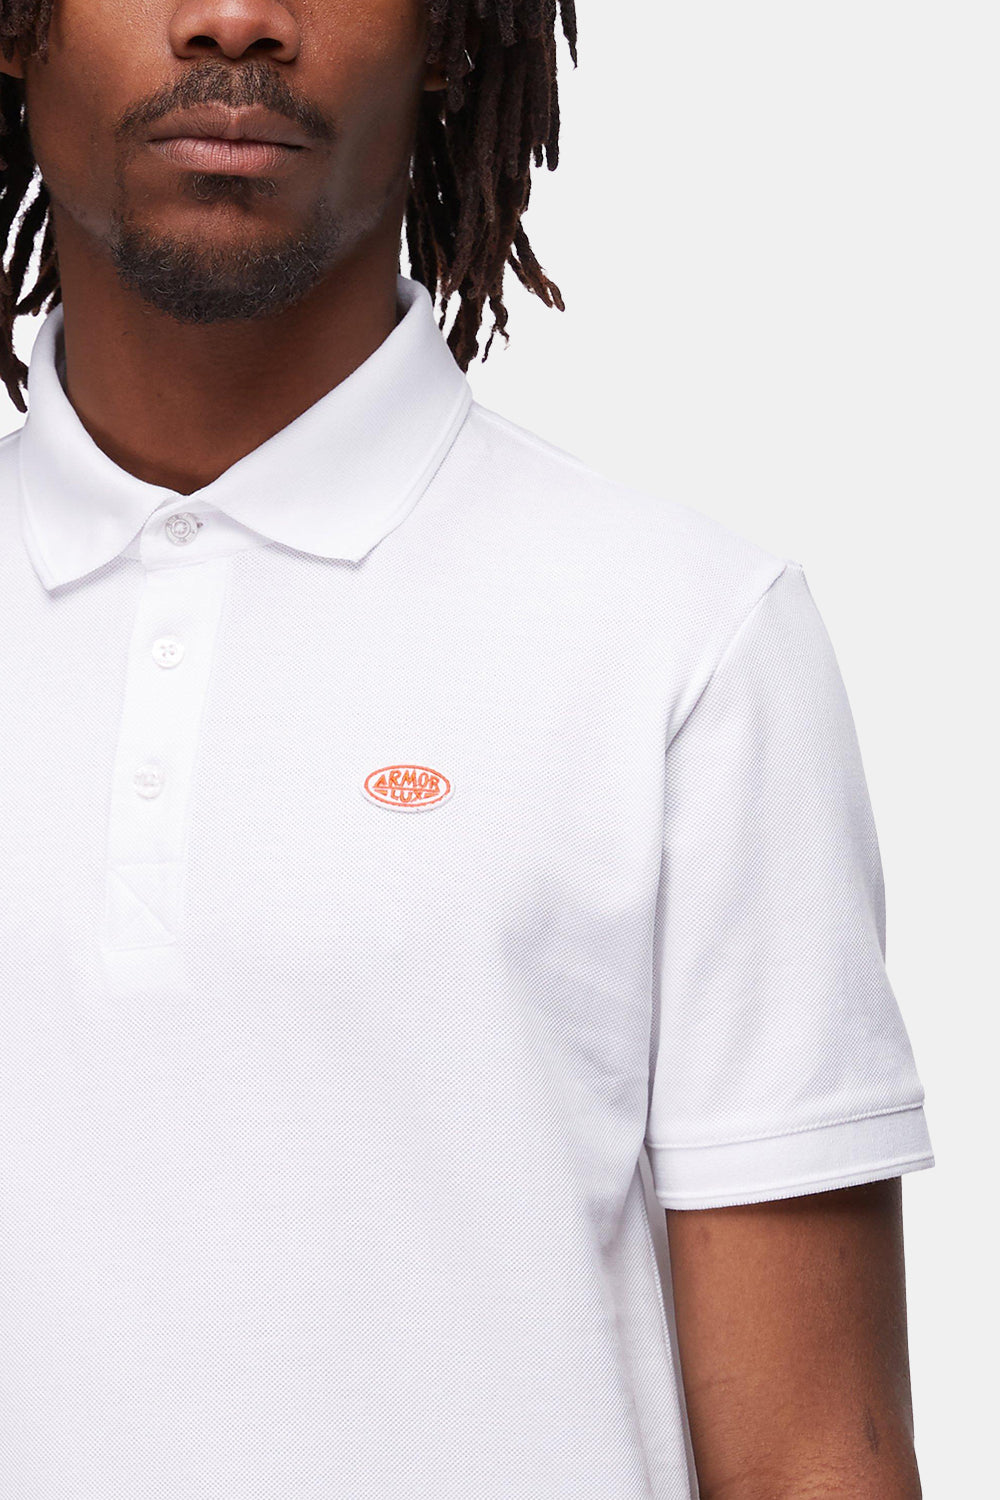 Armor Lux Heritage Short Sleeve Polo (White)